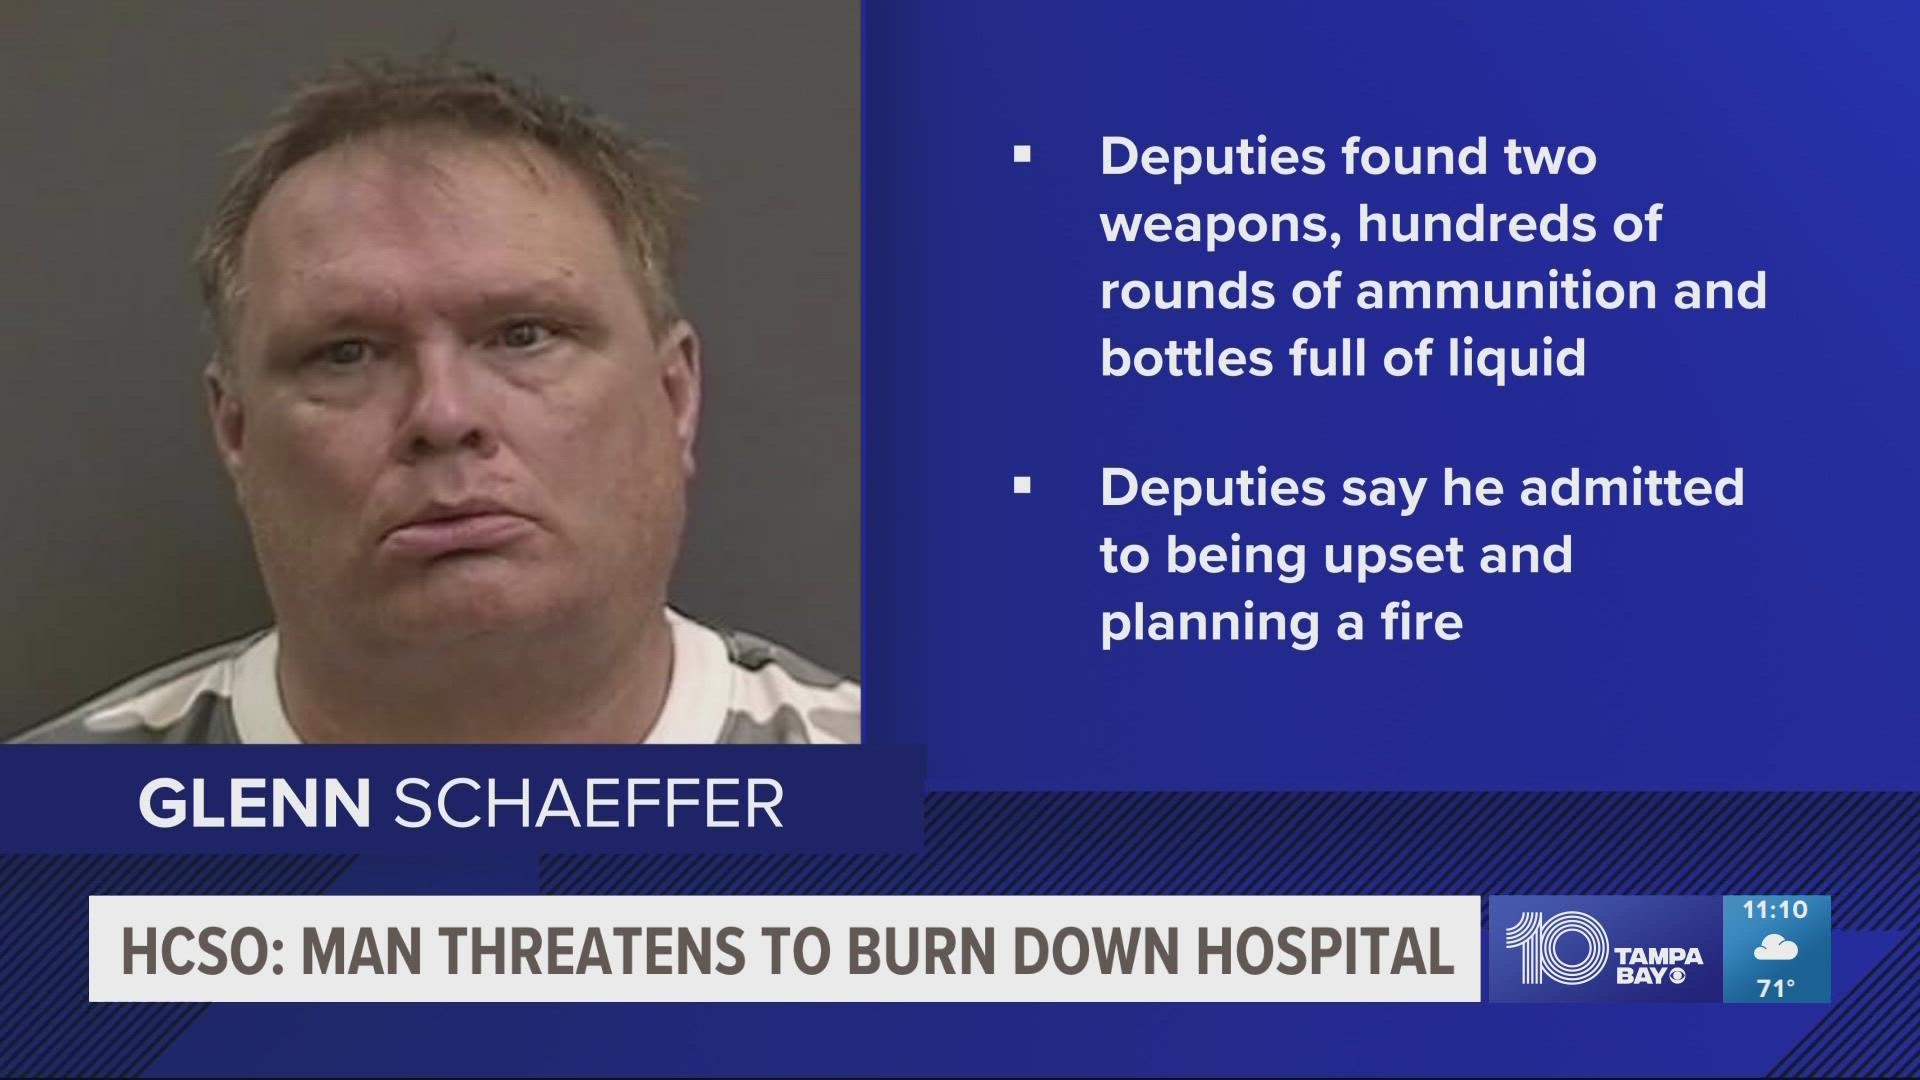 The sheriff's office said Glenn Schaeffer admitted to planning on igniting a liquid at St. Joseph's Hospital-South.